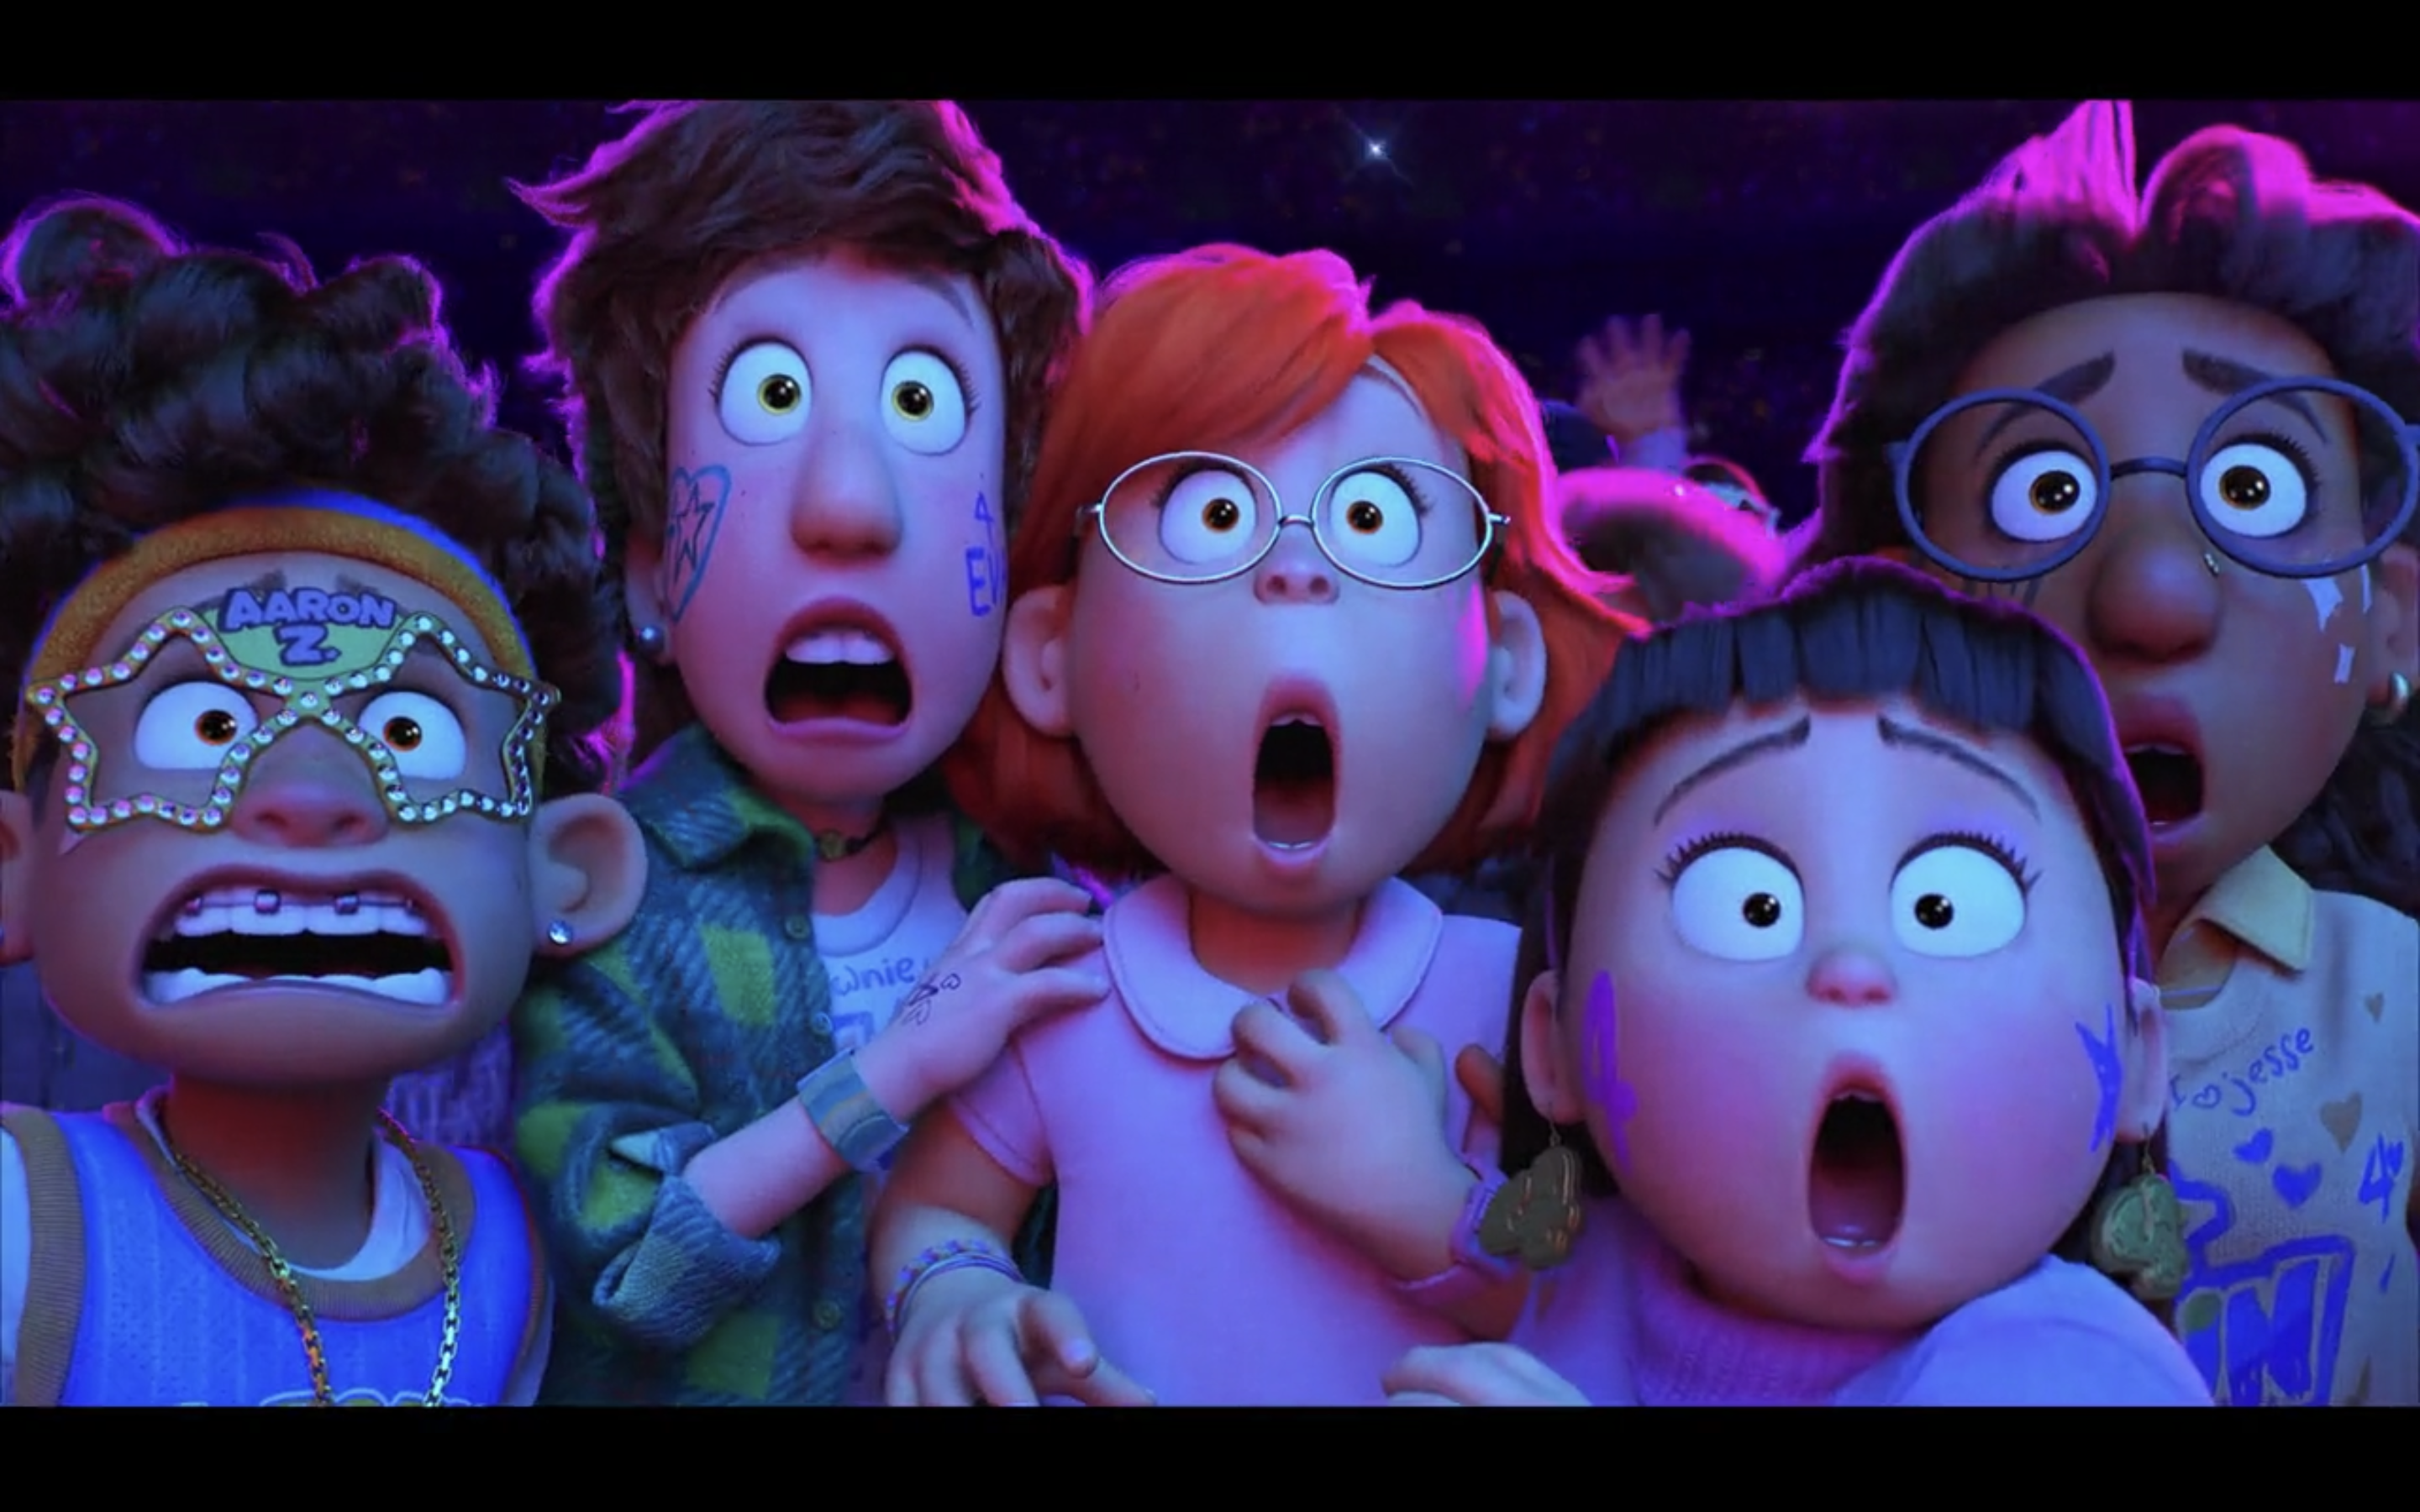 A still from the animated film “Turning Red,” showing five teen kids with mouths open, reacting broadly to something.